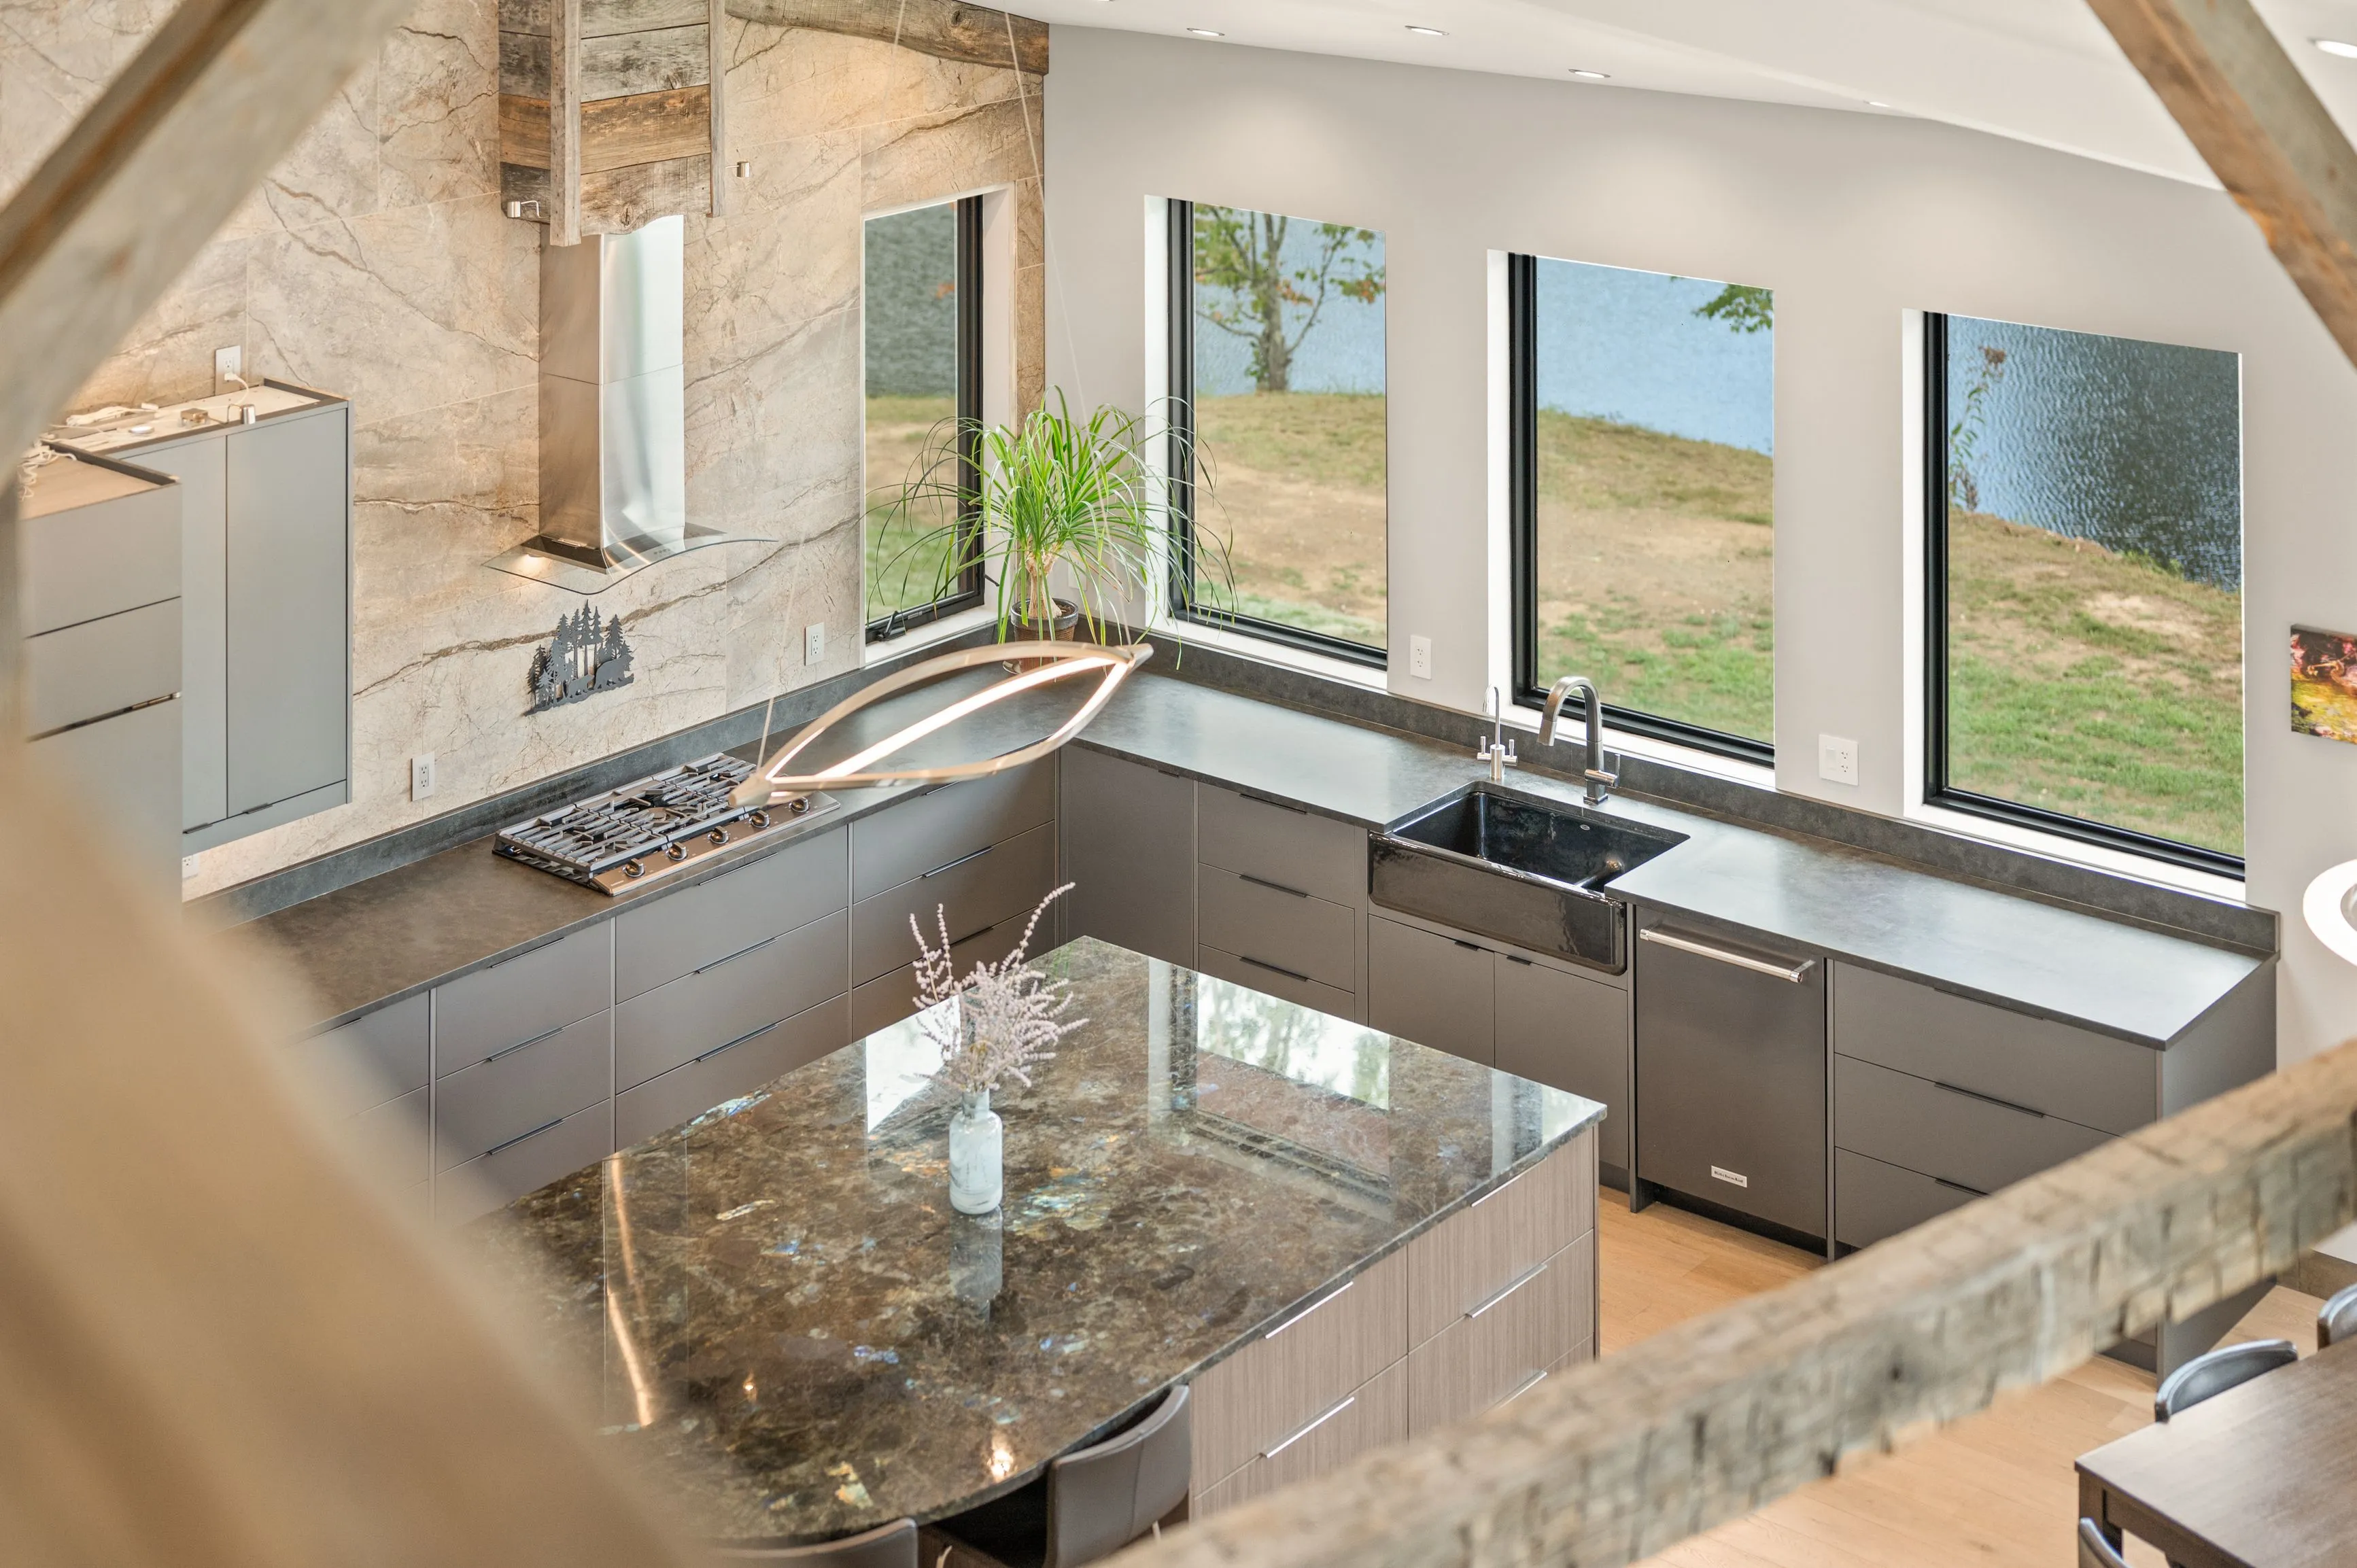 Modern kitchen interior with marble countertops, stainless steel appliances, and large windows overlooking nature.